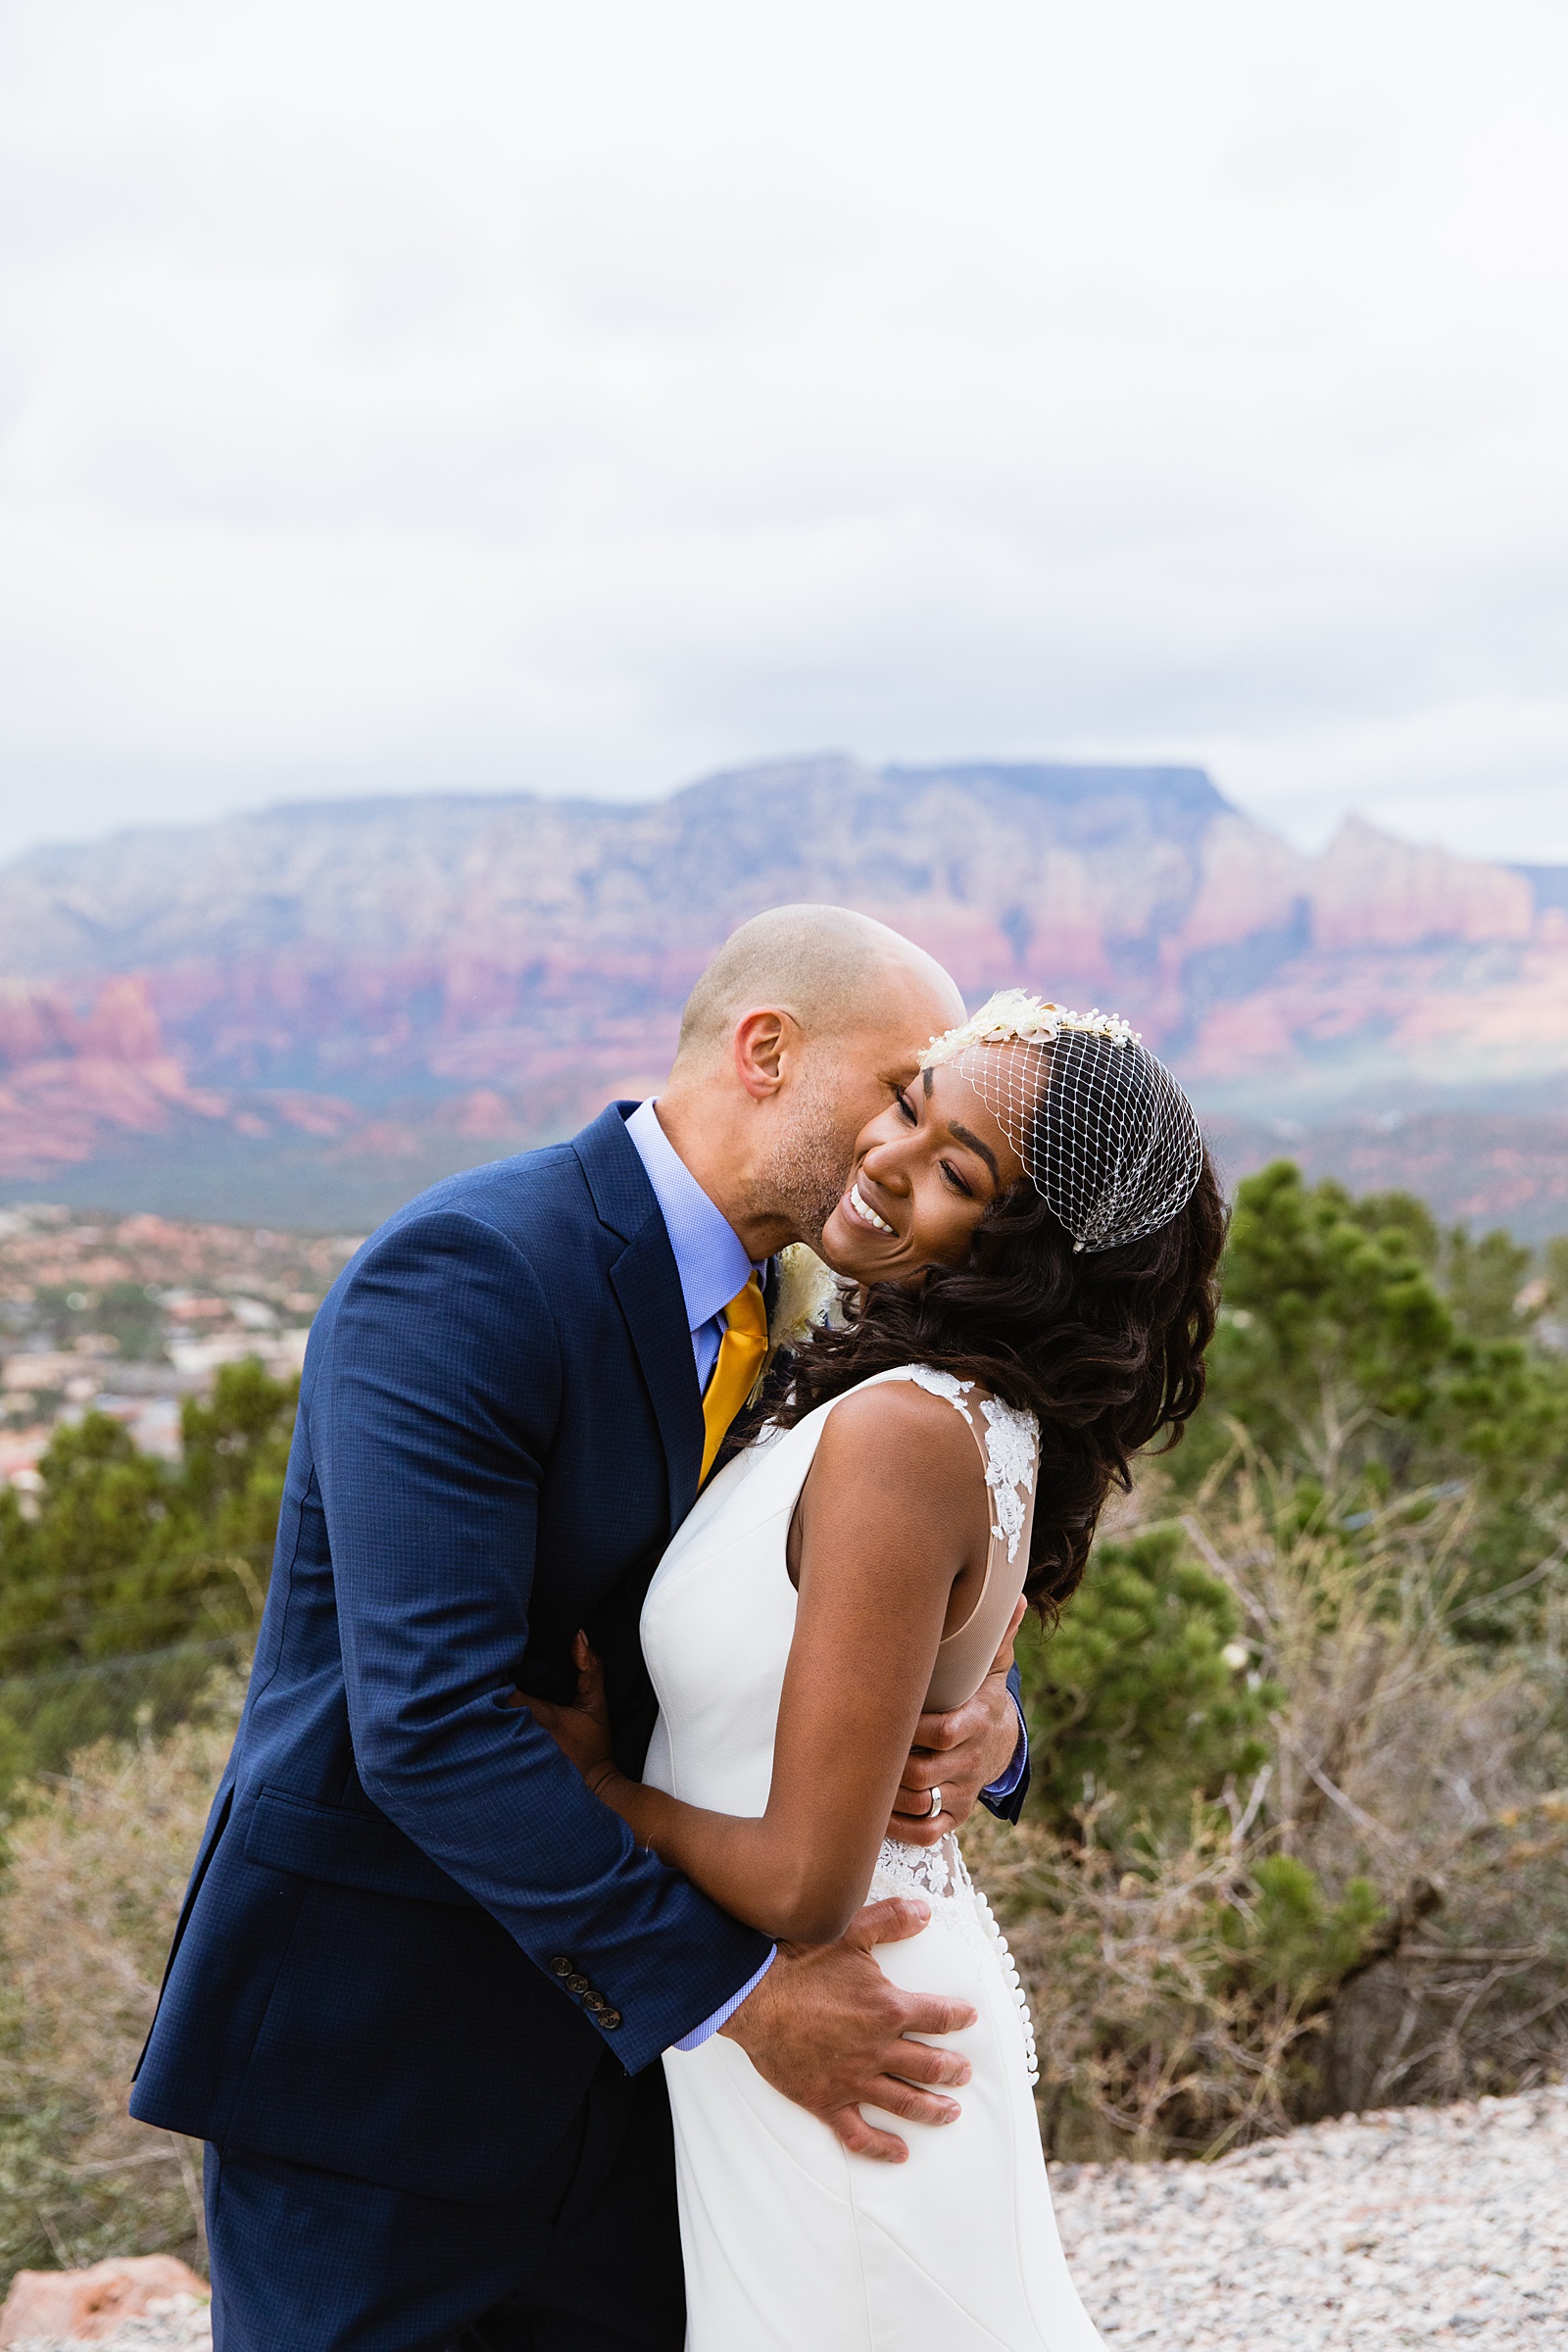 Bride and Groom share an intimate moment during their Agave of Sedona wedding by Sedona wedding photographer PMA Photography.